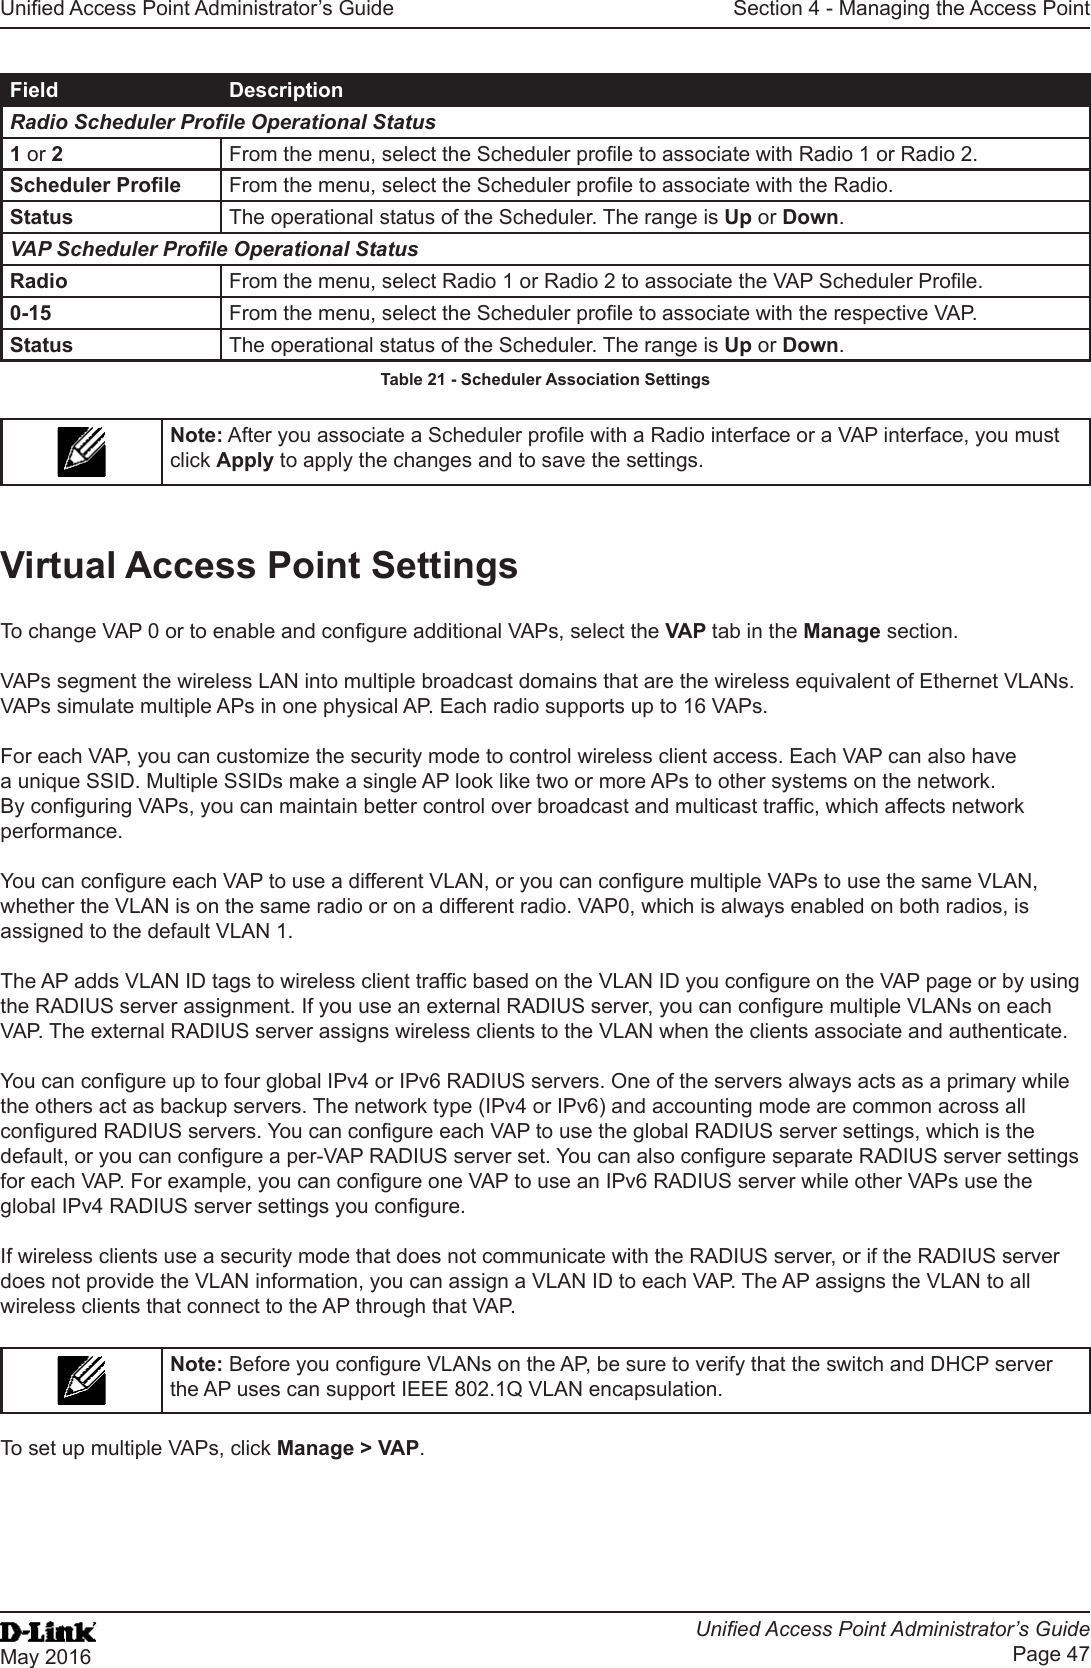 Unied Access Point Administrator’s GuideUnied Access Point Administrator’s GuidePage 47May 2016Section 4 - Managing the Access PointField DescriptionRadio Scheduler Prole Operational Status1 or 2  From the menu, select the Scheduler prole to associate with Radio 1 or Radio 2.Scheduler Prole From the menu, select the Scheduler prole to associate with the Radio.Status The operational status of the Scheduler. The range is Up or Down.VAP Scheduler Prole Operational StatusRadio From the menu, select Radio 1 or Radio 2 to associate the VAP Scheduler Prole.0-15 From the menu, select the Scheduler prole to associate with the respective VAP.Status The operational status of the Scheduler. The range is Up or Down.Table 21 - Scheduler Association SettingsNote: After you associate a Scheduler prole with a Radio interface or a VAP interface, you must click Apply to apply the changes and to save the settings.Virtual Access Point SettingsTo change VAP 0 or to enable and congure additional VAPs, select the VAP tab in the Manage section.VAPs segment the wireless LAN into multiple broadcast domains that are the wireless equivalent of Ethernet VLANs. VAPs simulate multiple APs in one physical AP. Each radio supports up to 16 VAPs.For each VAP, you can customize the security mode to control wireless client access. Each VAP can also have a unique SSID. Multiple SSIDs make a single AP look like two or more APs to other systems on the network. By conguring VAPs, you can maintain better control over broadcast and multicast trafc, which affects network performance. You can congure each VAP to use a different VLAN, or you can congure multiple VAPs to use the same VLAN, whether the VLAN is on the same radio or on a different radio. VAP0, which is always enabled on both radios, is assigned to the default VLAN 1.The AP adds VLAN ID tags to wireless client trafc based on the VLAN ID you congure on the VAP page or by using the RADIUS server assignment. If you use an external RADIUS server, you can congure multiple VLANs on each VAP. The external RADIUS server assigns wireless clients to the VLAN when the clients associate and authenticate.You can congure up to four global IPv4 or IPv6 RADIUS servers. One of the servers always acts as a primary while the others act as backup servers. The network type (IPv4 or IPv6) and accounting mode are common across all congured RADIUS servers. You can congure each VAP to use the global RADIUS server settings, which is the default, or you can congure a per-VAP RADIUS server set. You can also congure separate RADIUS server settings for each VAP. For example, you can congure one VAP to use an IPv6 RADIUS server while other VAPs use the global IPv4 RADIUS server settings you congure.If wireless clients use a security mode that does not communicate with the RADIUS server, or if the RADIUS server does not provide the VLAN information, you can assign a VLAN ID to each VAP. The AP assigns the VLAN to all wireless clients that connect to the AP through that VAP.Note: Before you congure VLANs on the AP, be sure to verify that the switch and DHCP server the AP uses can support IEEE 802.1Q VLAN encapsulation. To set up multiple VAPs, click Manage &gt; VAP.